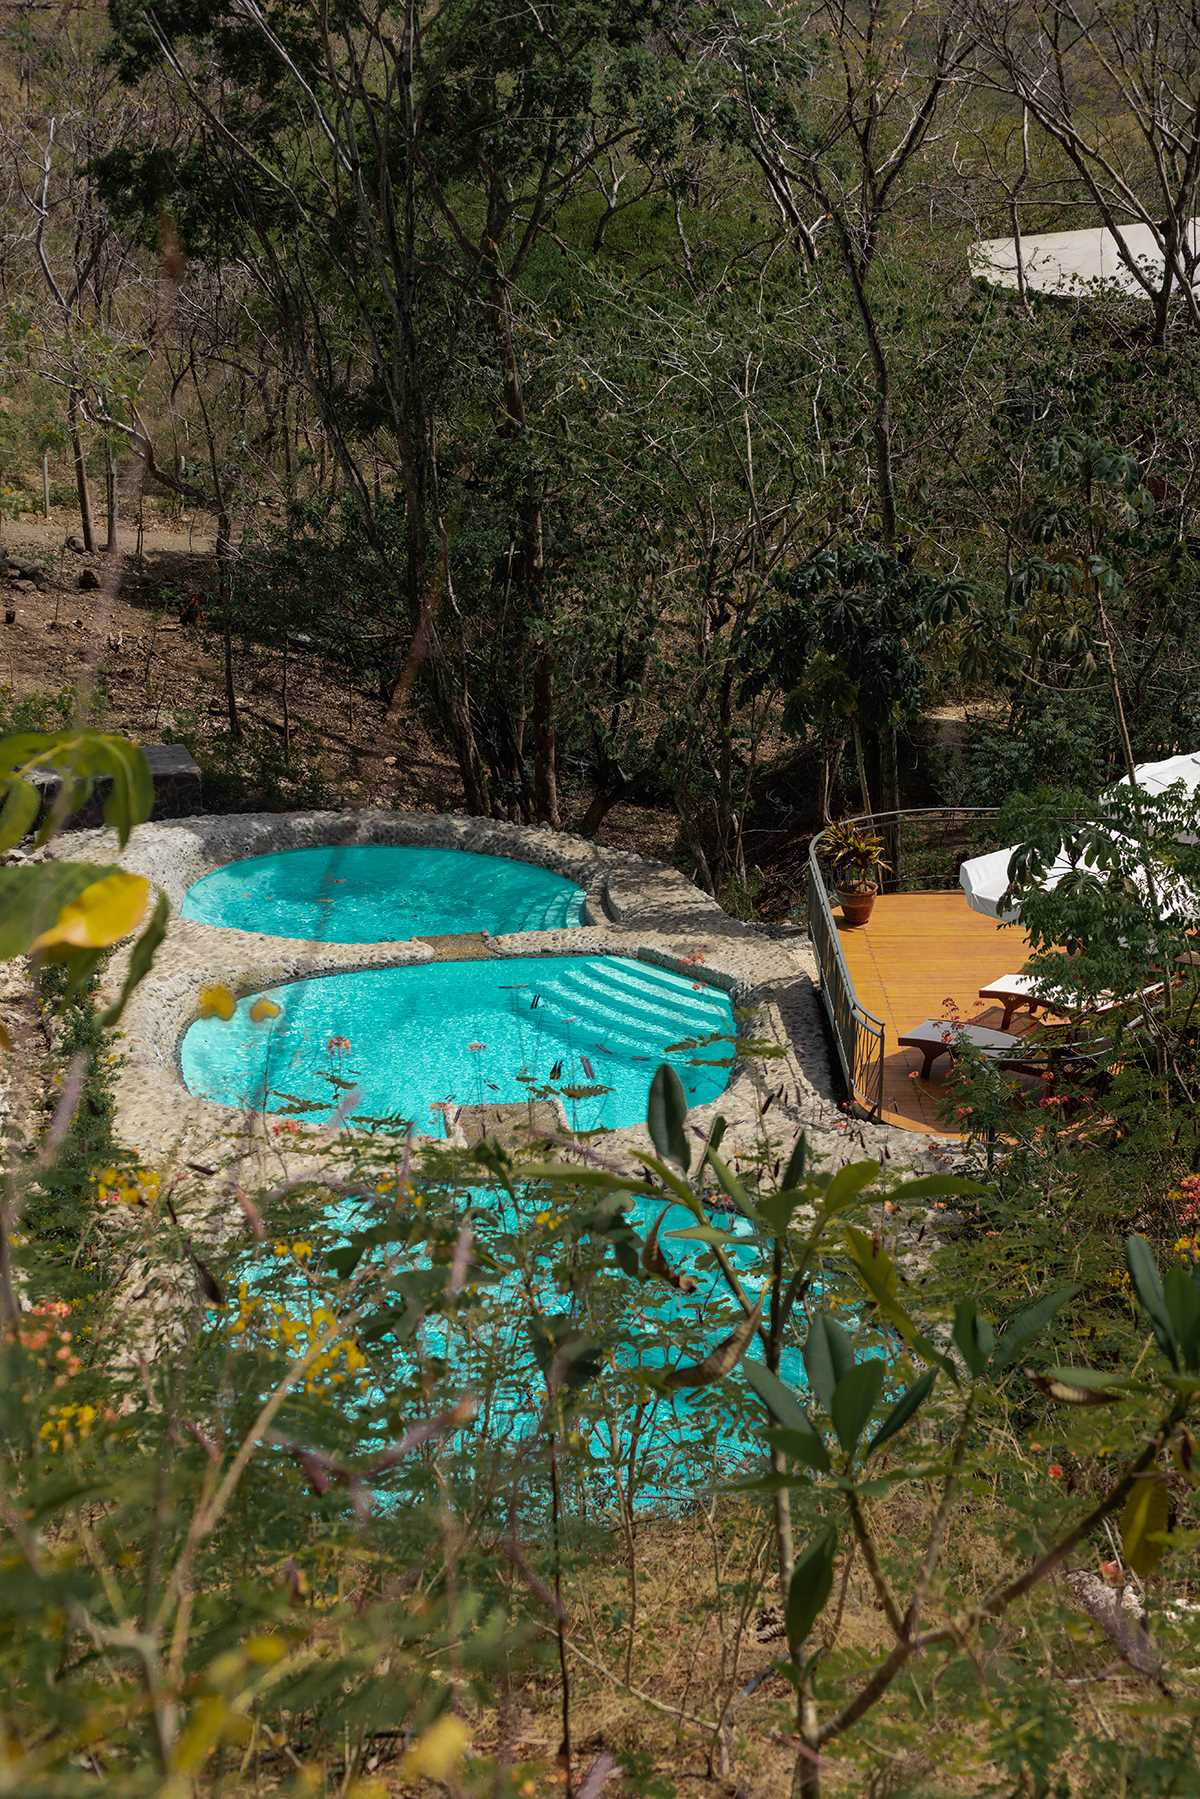 These swimming pools each have a round shape and are tiered allowing the water to flow between them.